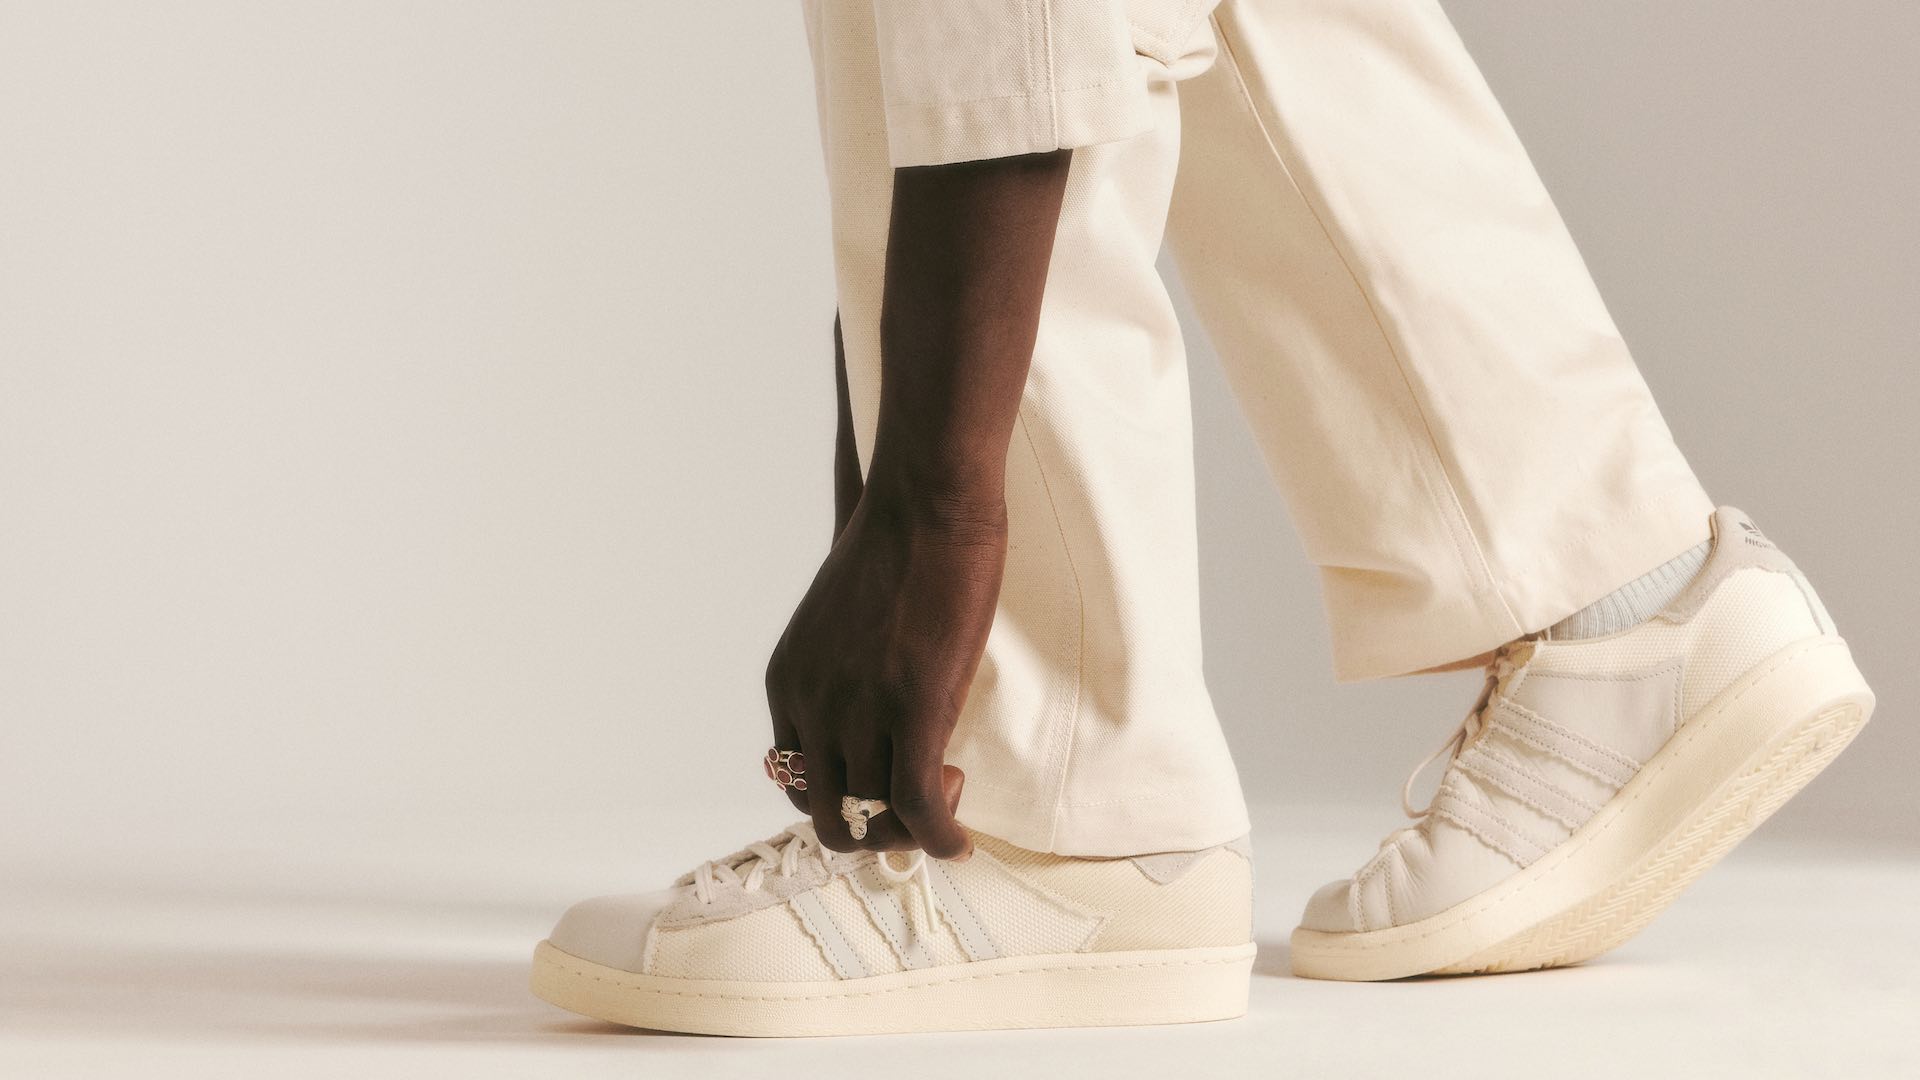 Limited-edition sneaker launch marks adidas and Highsnobiety collaboration